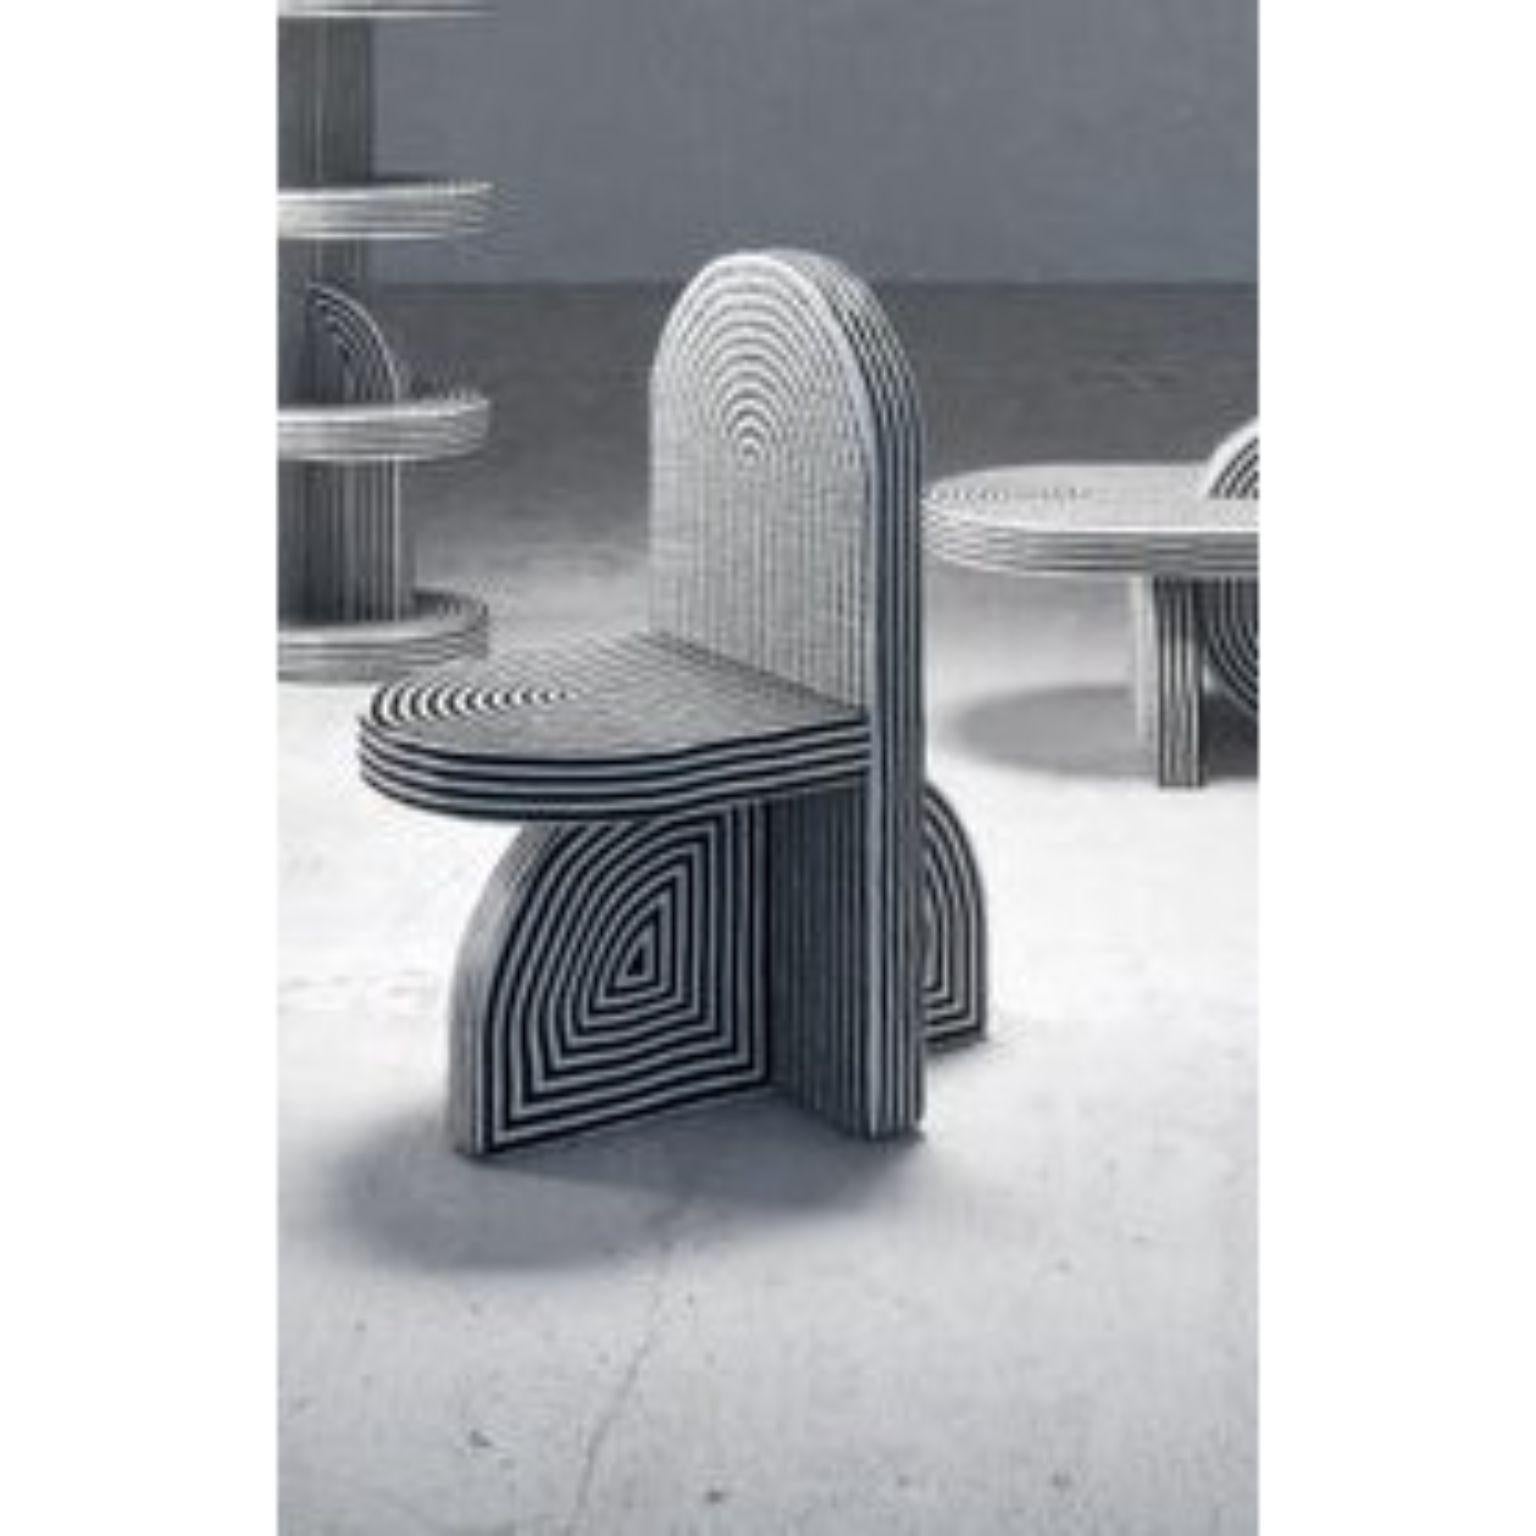 After Ago chair by Richard Yasmine
Materials: Foam, Lightweight concrete, plaster and acrylic
Dimensions: H 90 x W 45 x D 52cm/65cm
Seat height 45 cm
Seat depth 45cm 
Seat width 45 cm
Total depth on floor 75 cm

After Ago is an ode to an